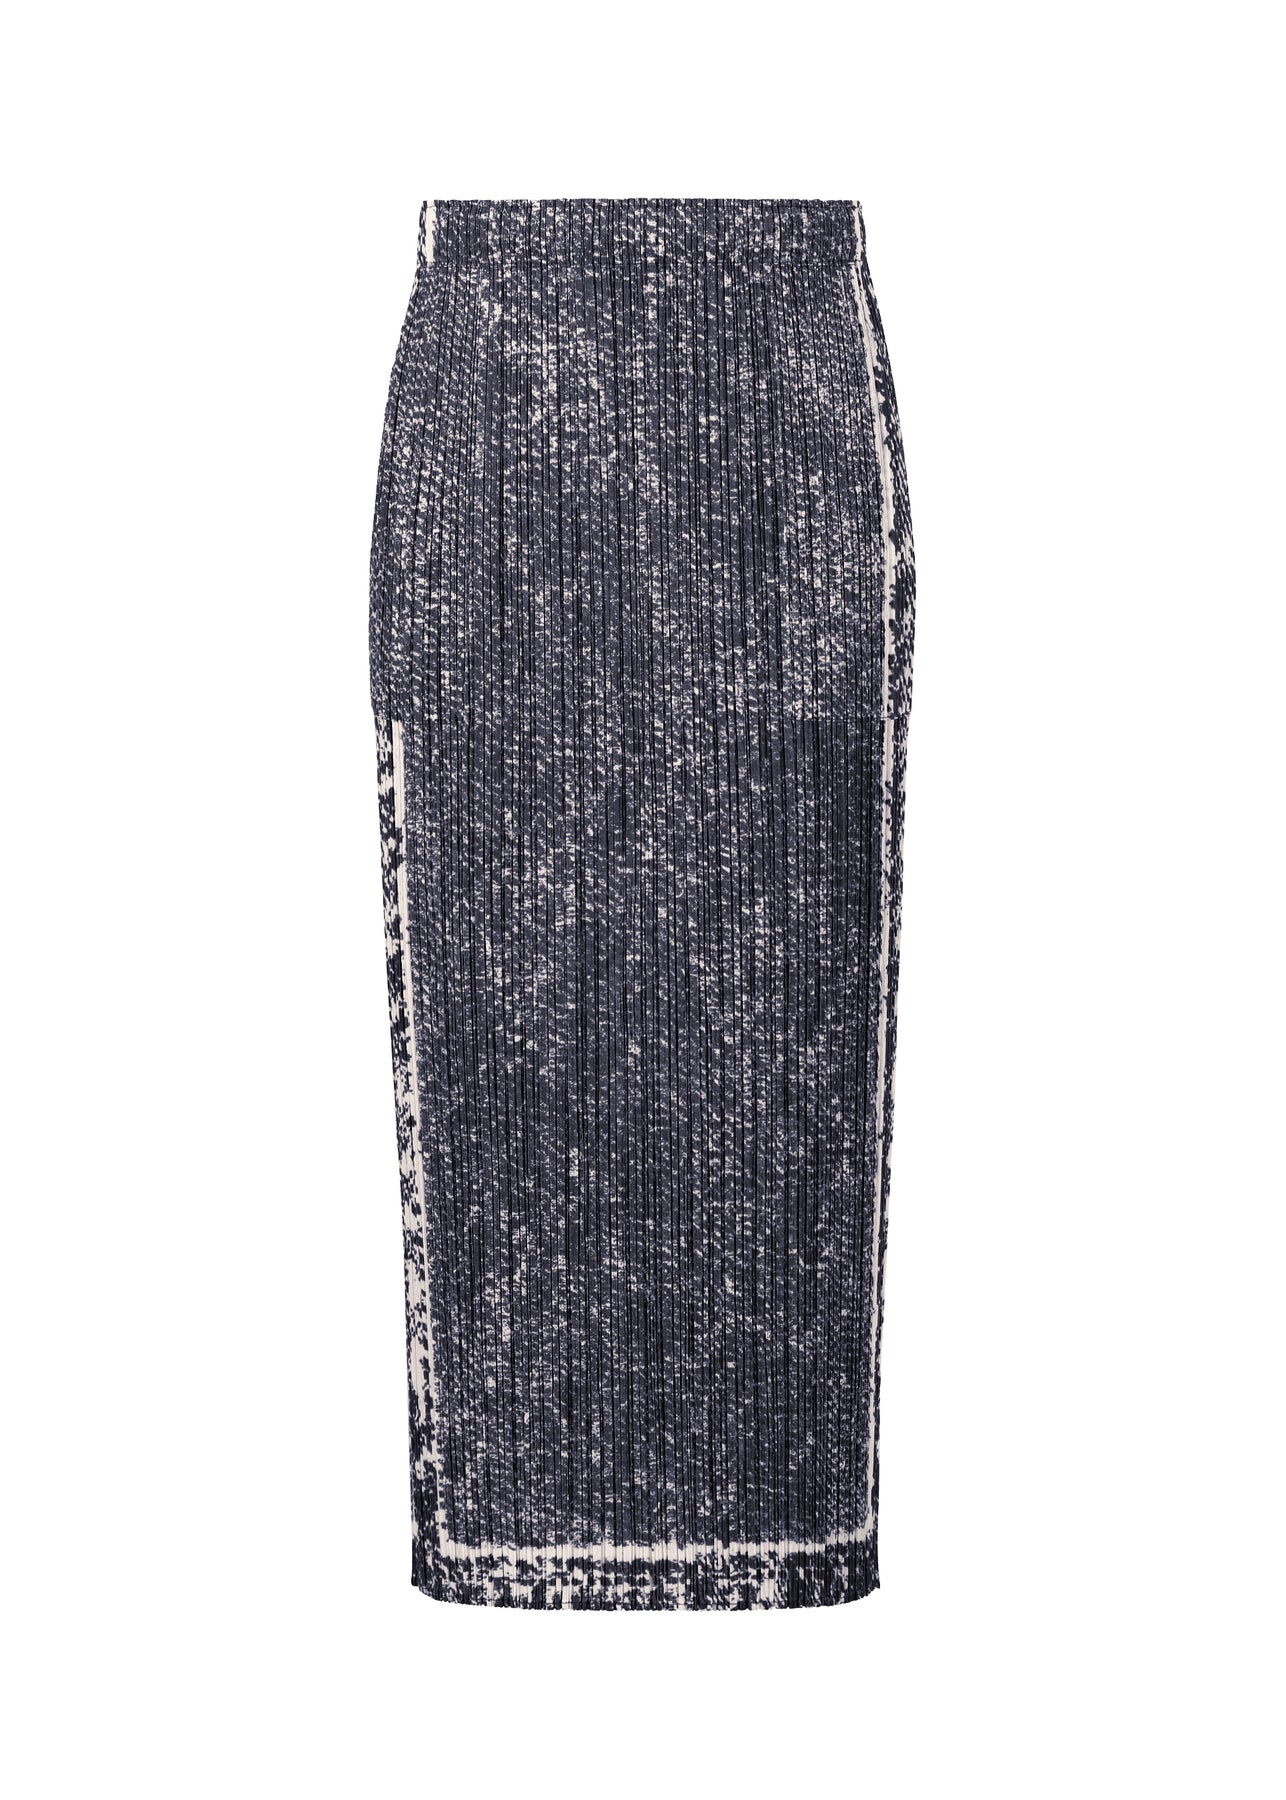 TRAIL DENIM SKIRT | The official ISSEY MIYAKE ONLINE STORE | ISSEY